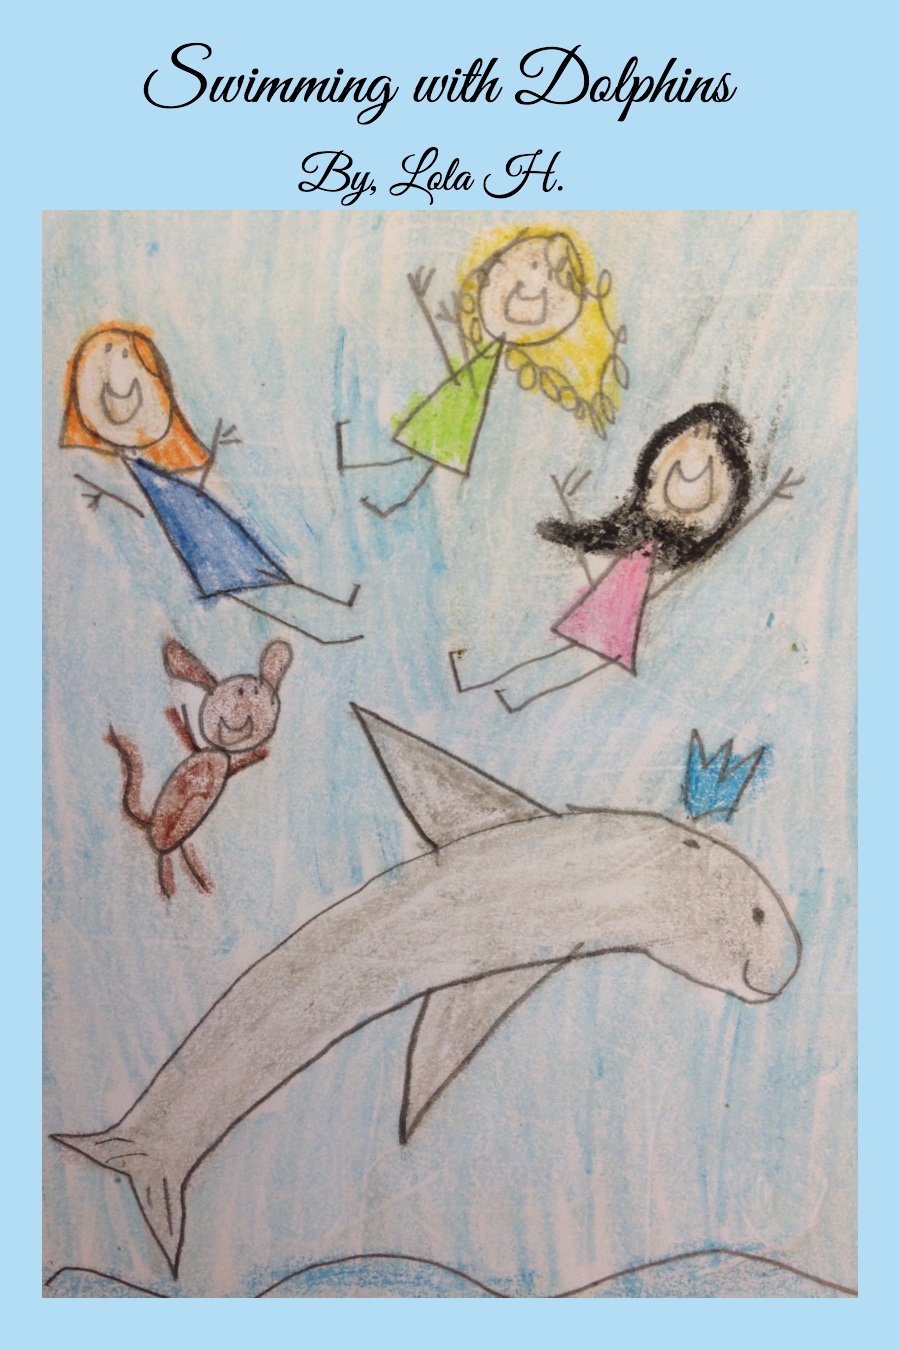 Swiming with Dolphins by Lola H